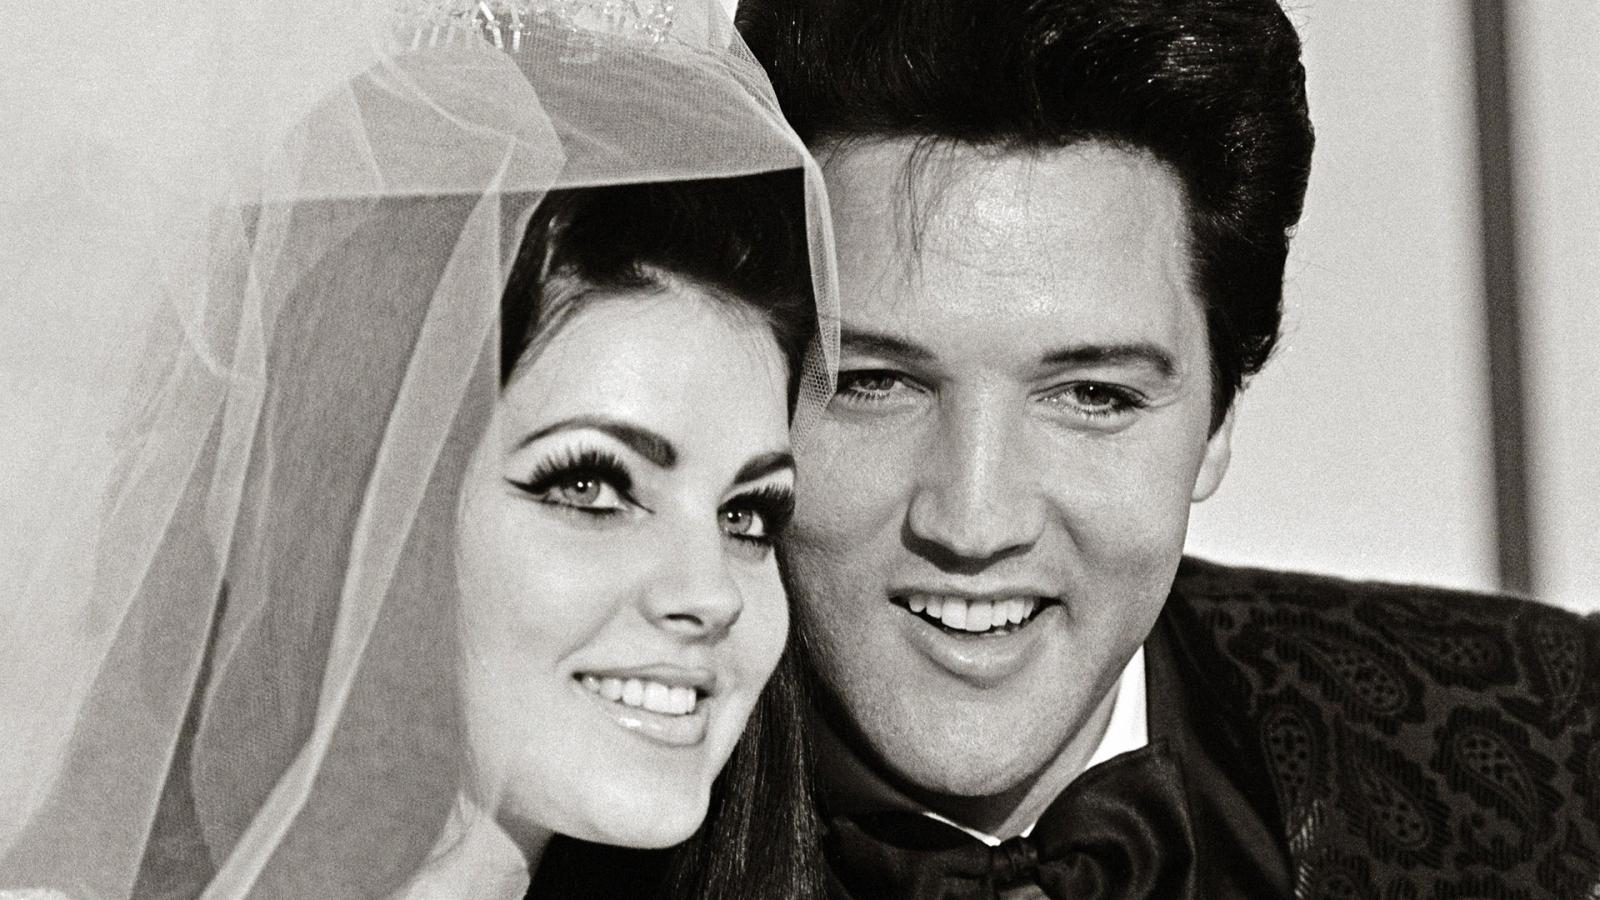 However Scandalous, This Celebrity Romance Was the Biggest Love Story of 20th Century - image 1